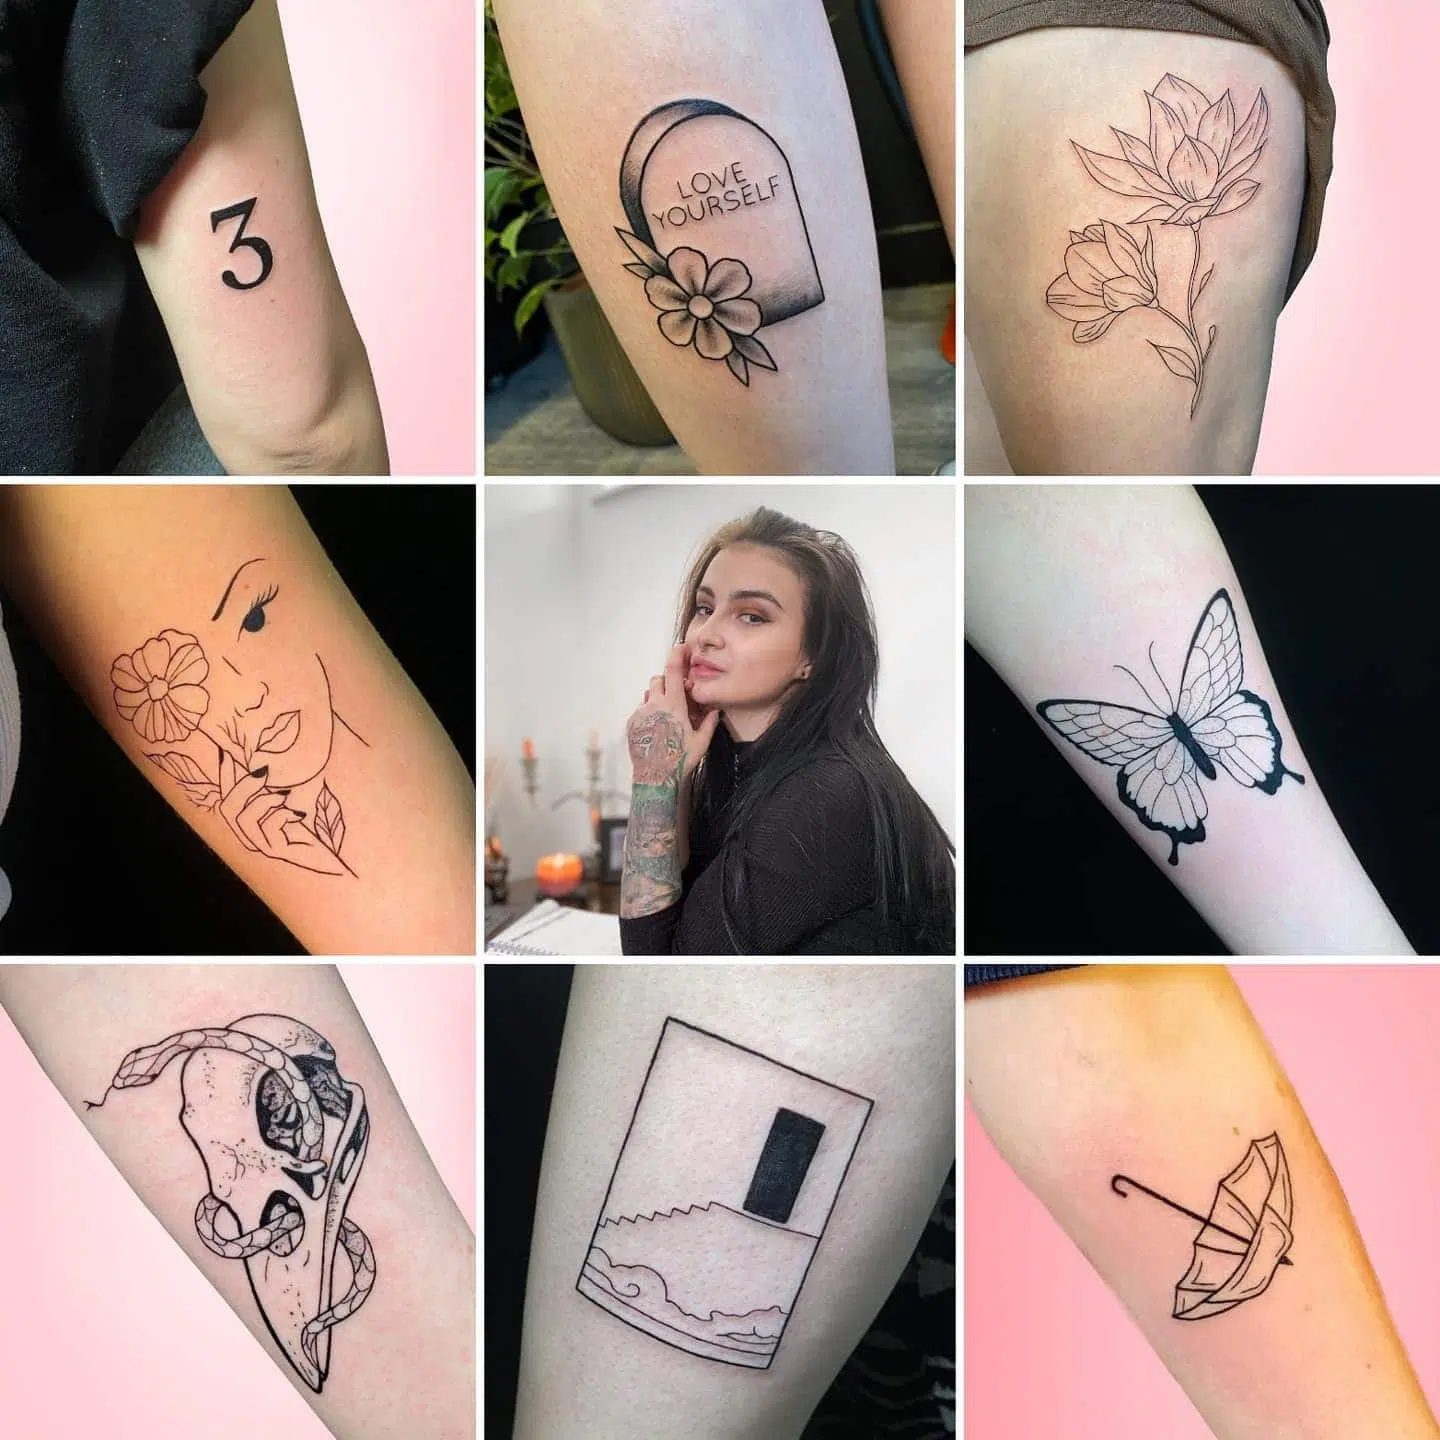 Jess Wii is returning to Watermelon for another guest spot between the 7th and 11th September!!! Fill out the enquiry form on the homepage of our website to book in!
jess.wii.tattoos 

         